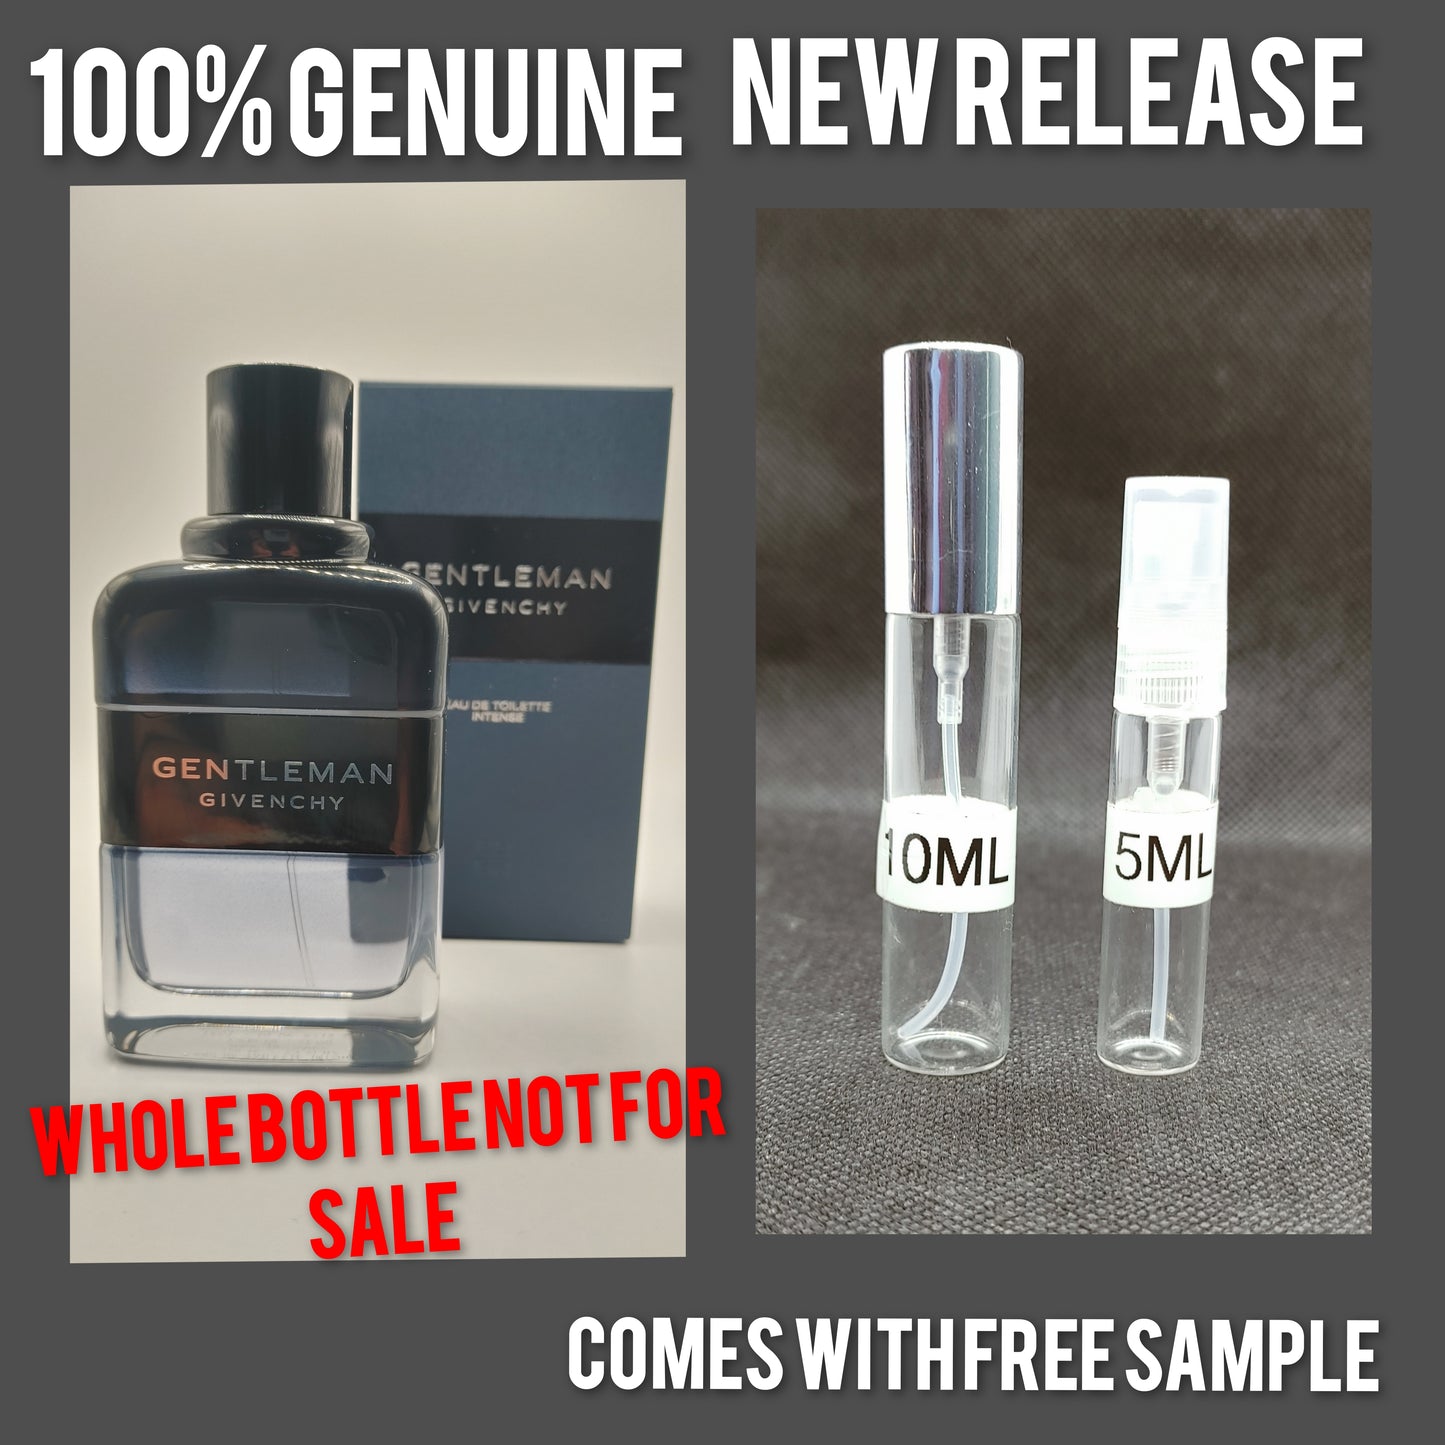 Givenchy Gentleman Eau De Toillete Intense Samples. Comes with Free Sample and travel bag